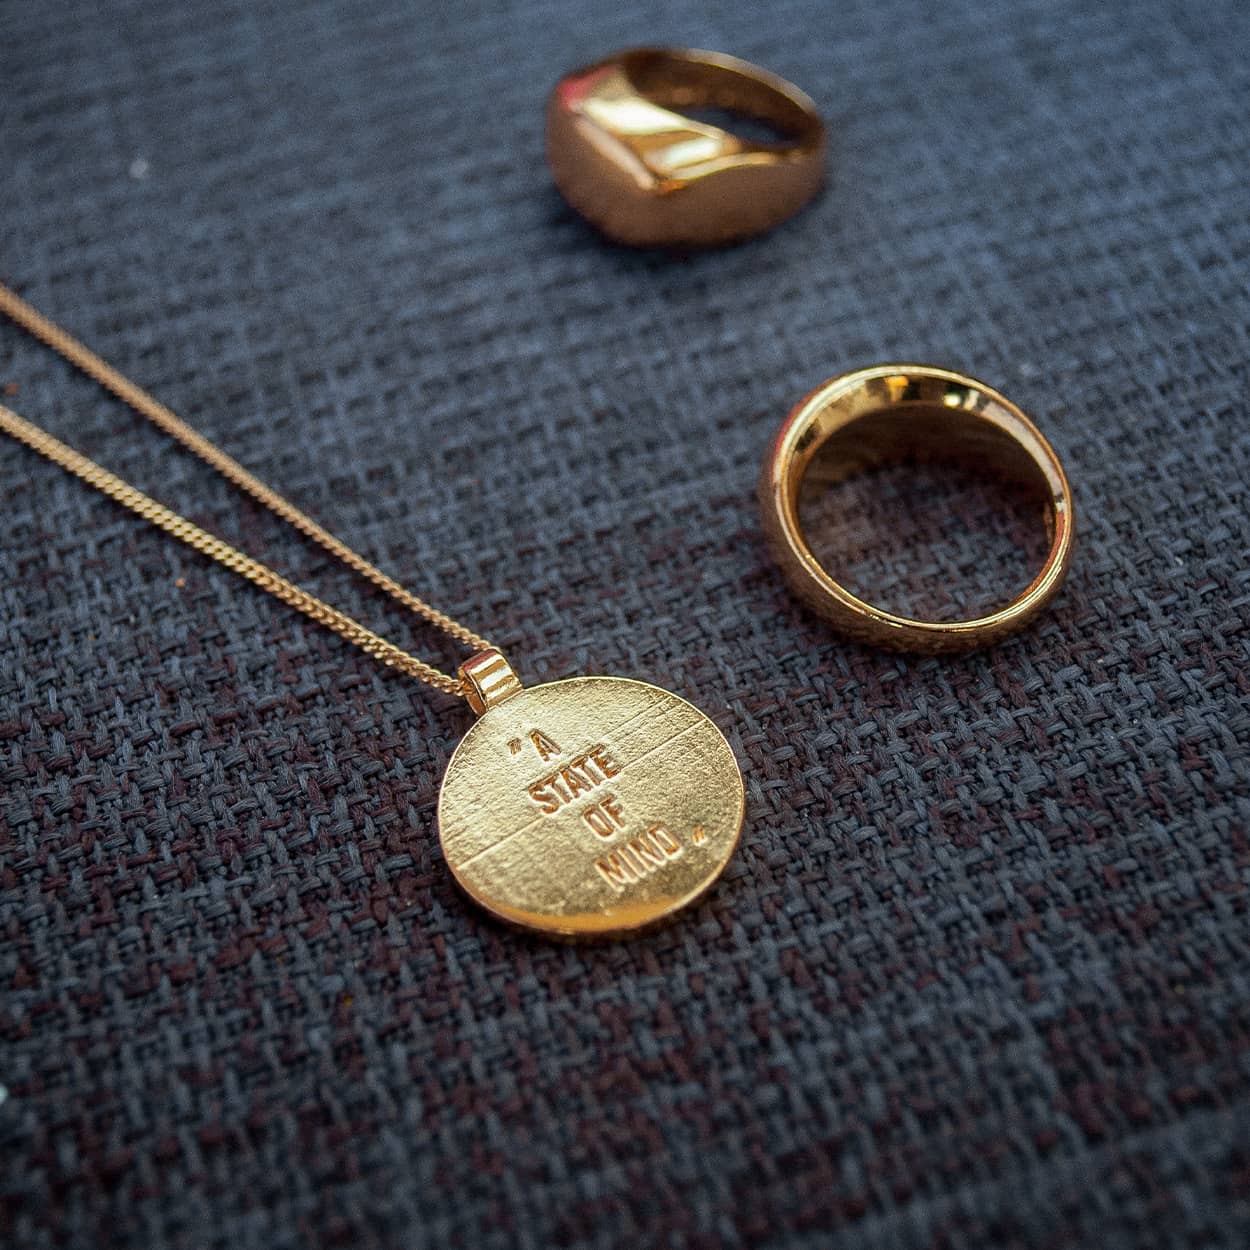 Atelier Domingo's State of Mind gold necklace is designed in France and made in Spain. This necklace is unisex, made for both men and women. The pendant is made of a high-quality 24 karat gold plating. The cuban chain is made of solid 925 Sterling silver with a high-quality 18 karat gold plating.